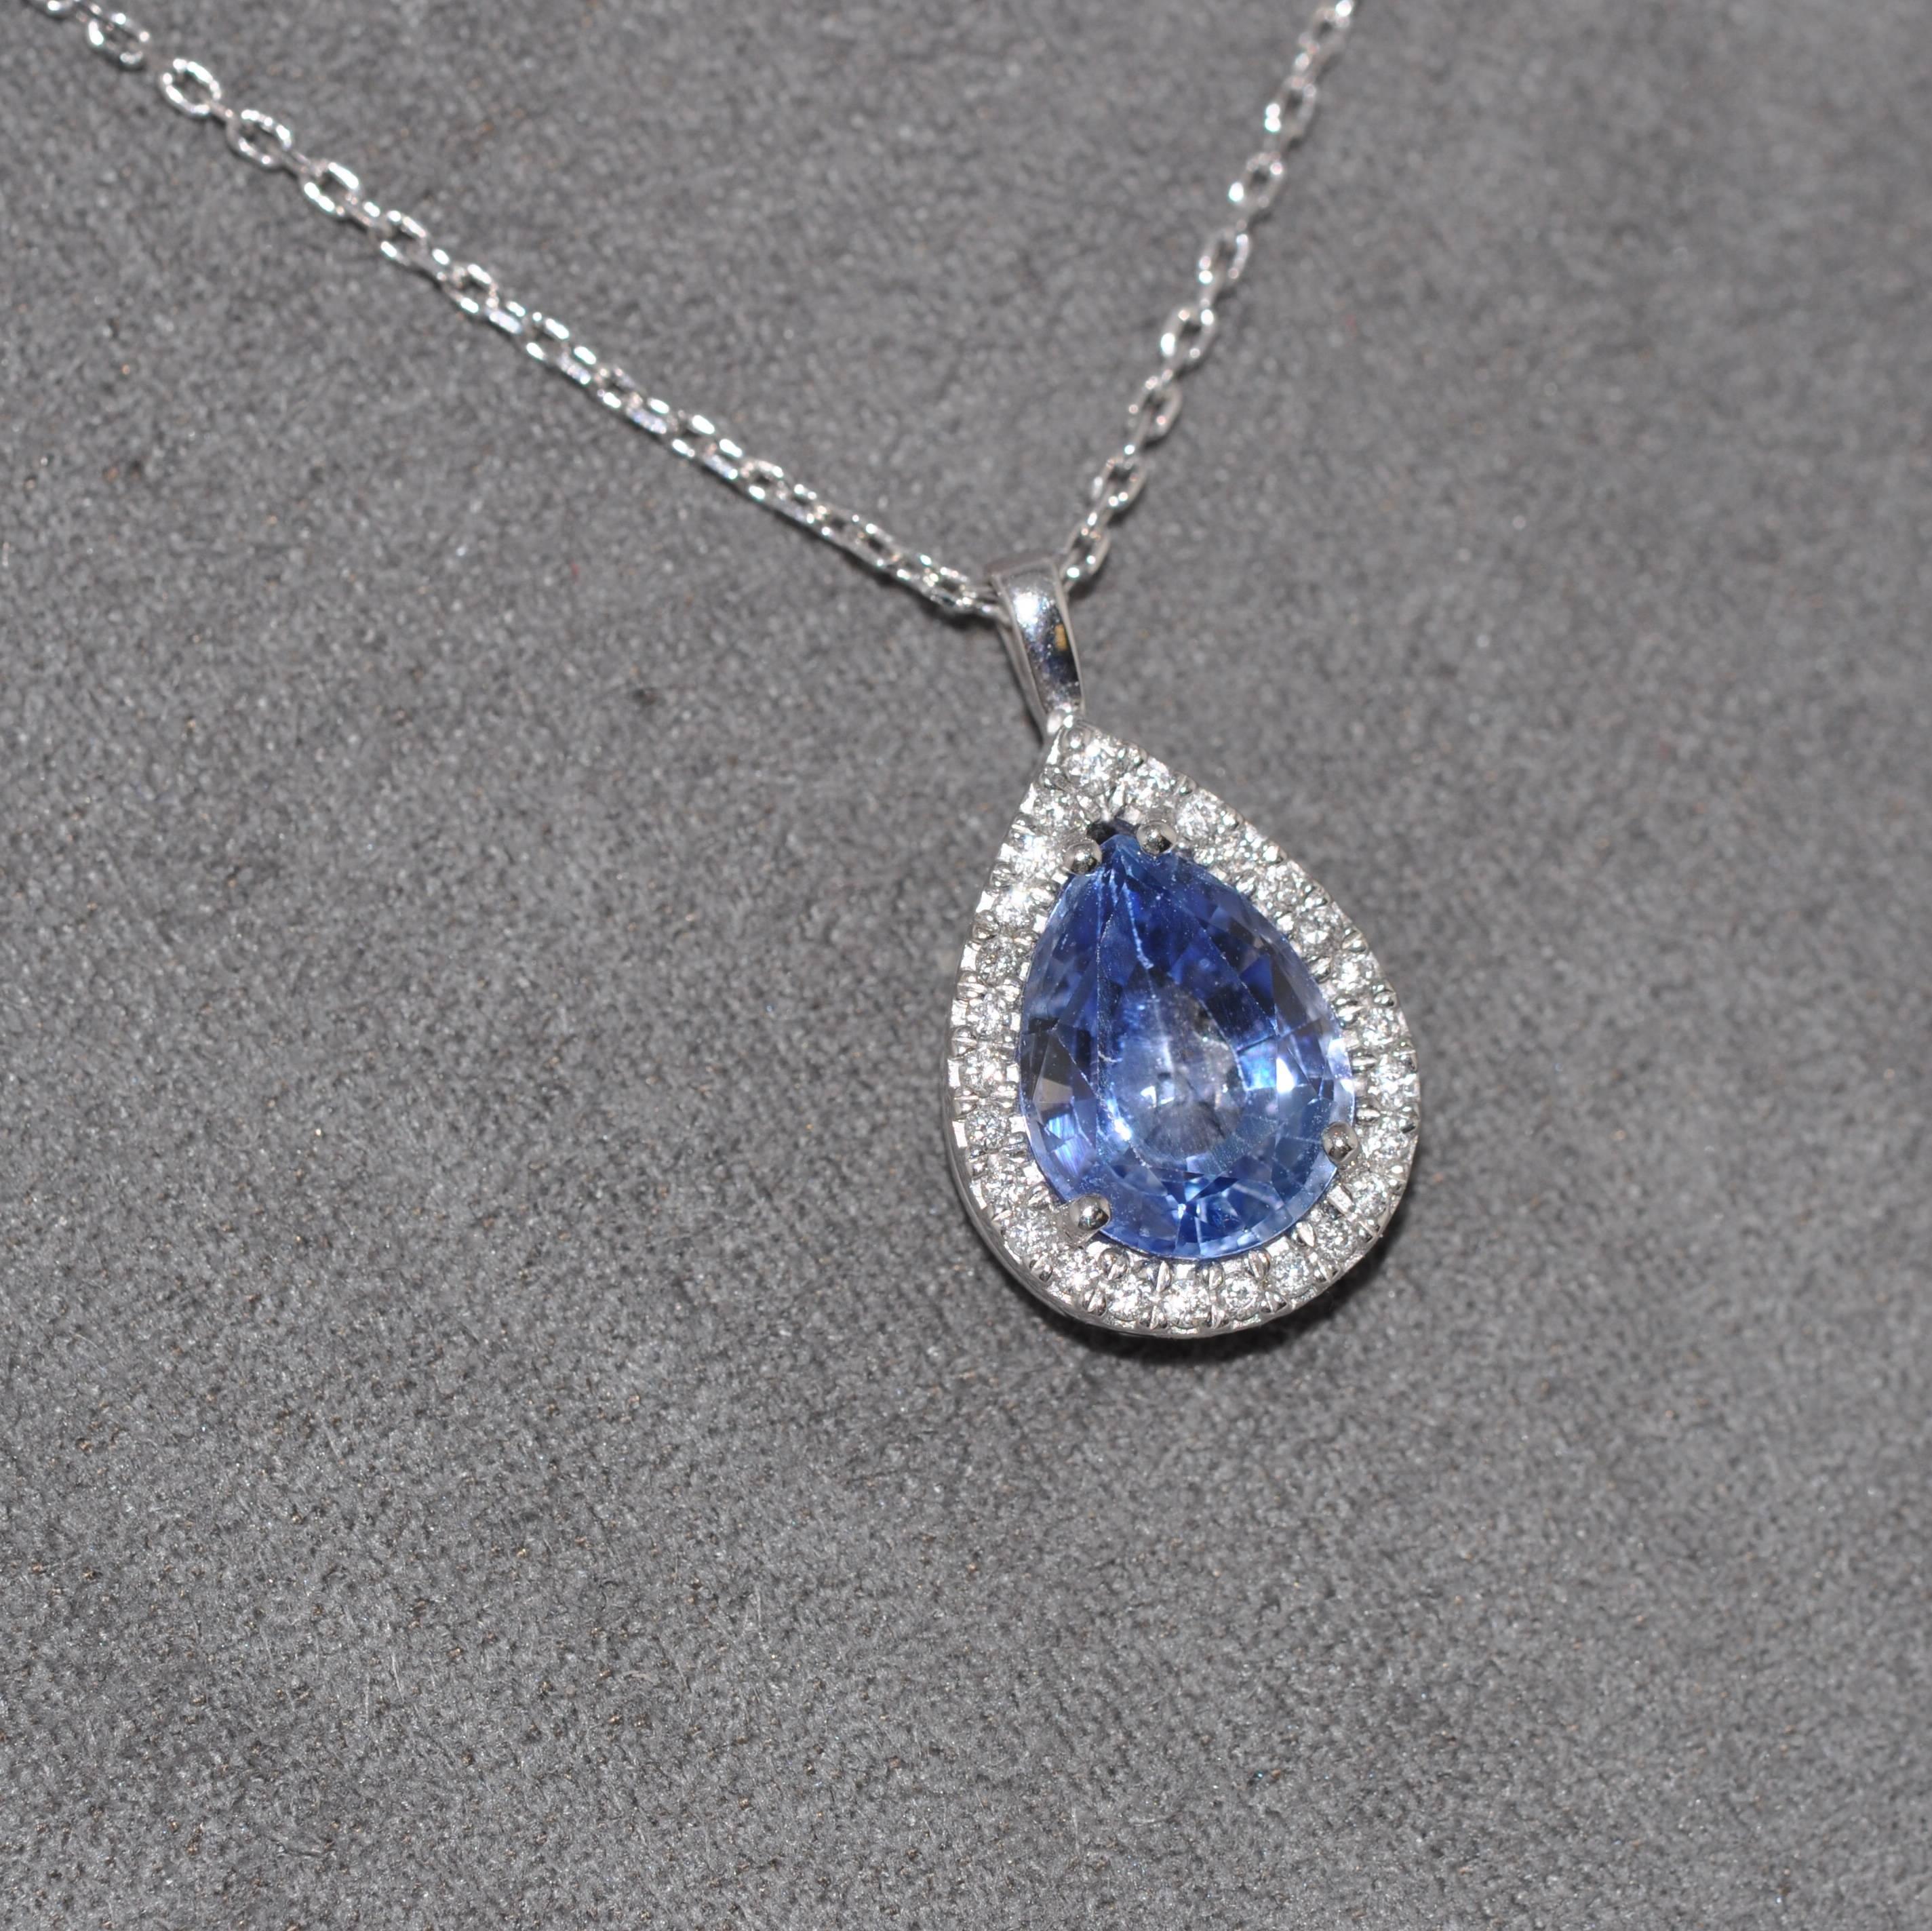 Discover this Sapphire and White Diamonds on White Gold 18K Pendant Necklace.
Pear Sapphire ct 1.30
White Diamonds ct 0.10 Color H Purity SI
White Gold 18K 
